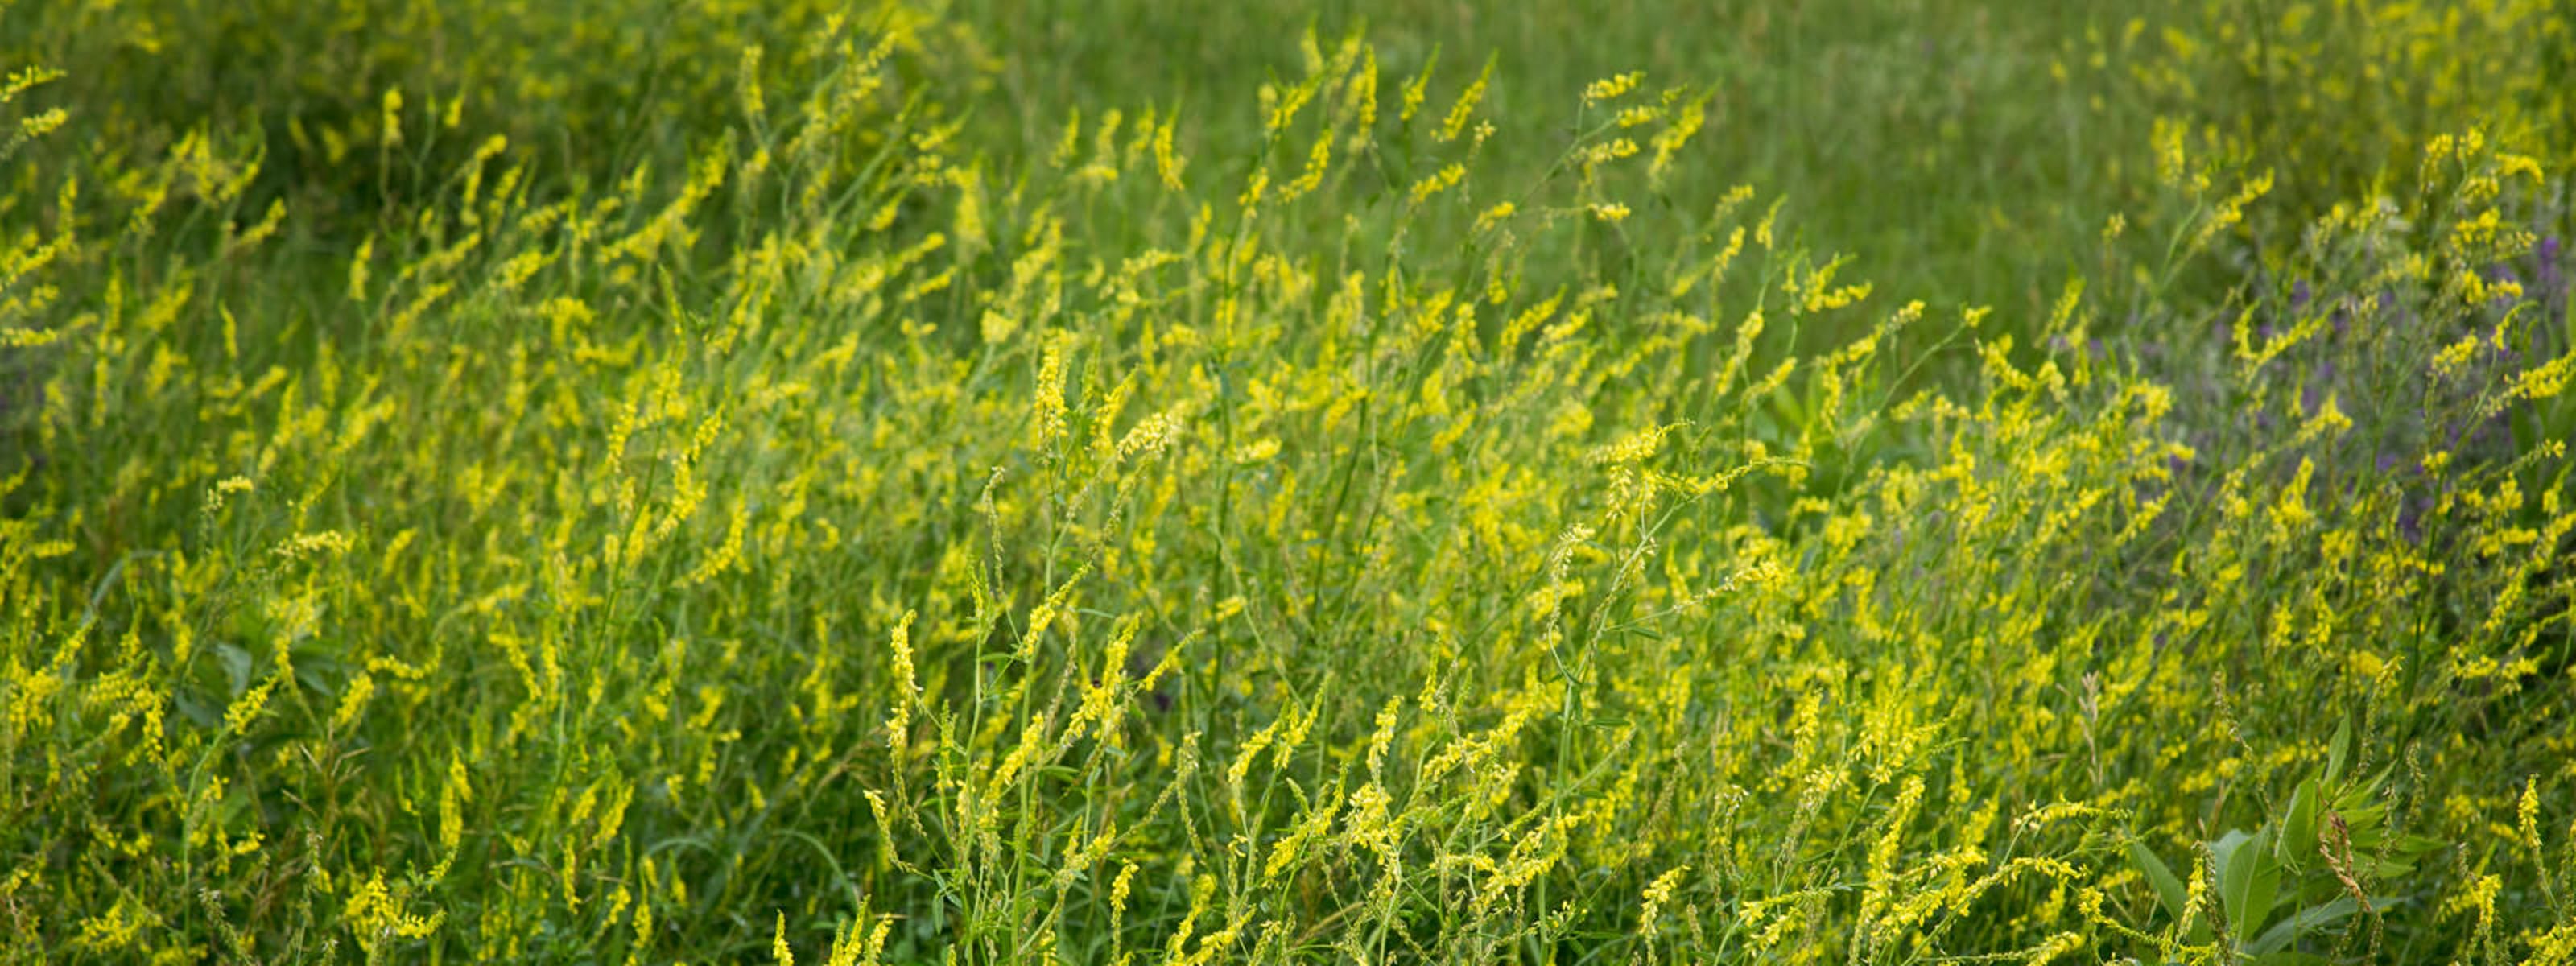 Field of sweet clover plant in the prairies.